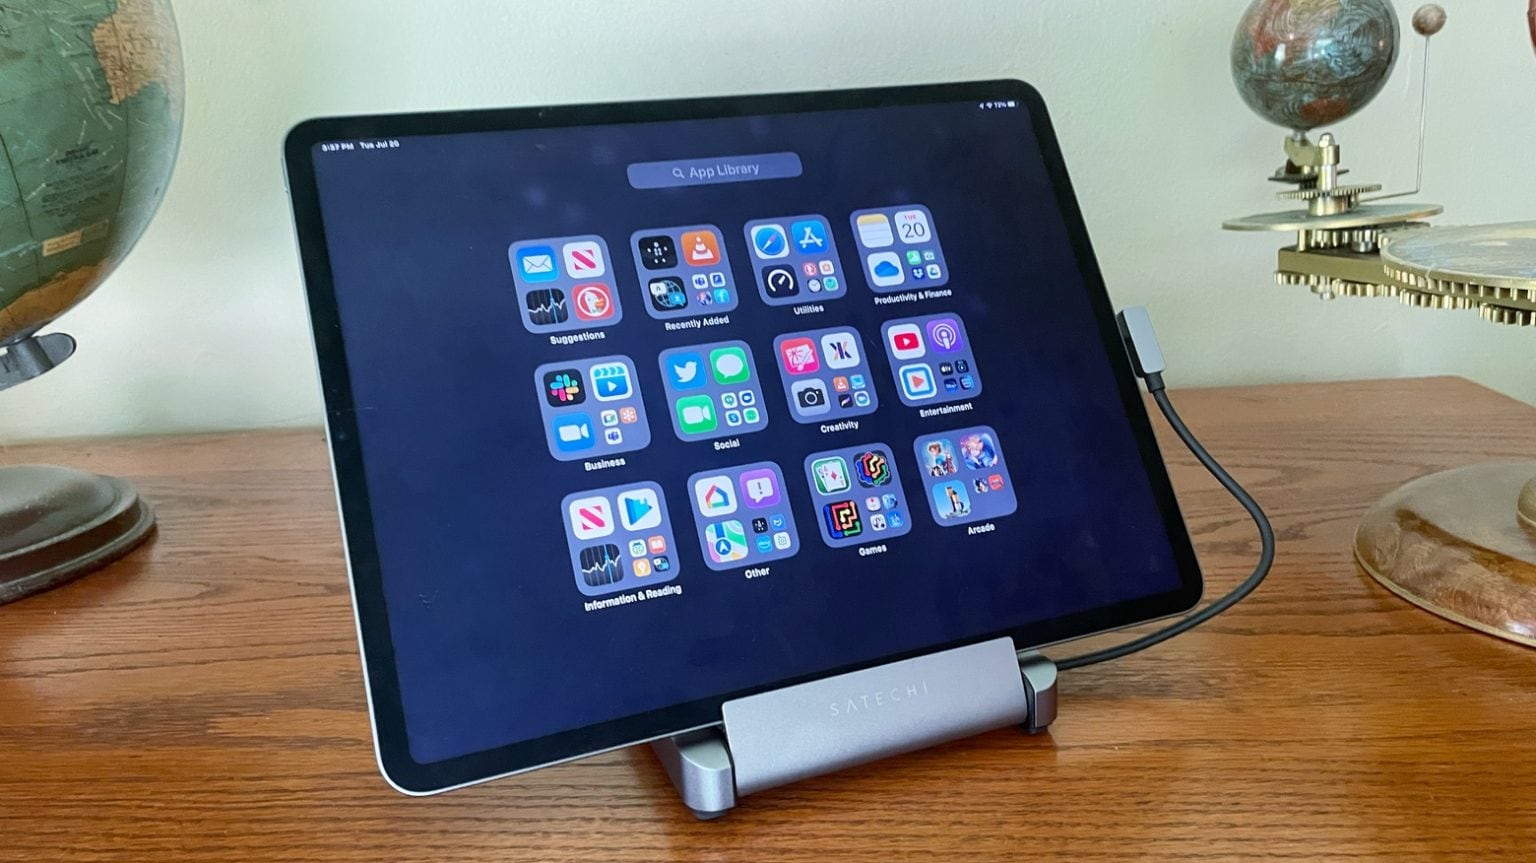 Satechi Aluminum Stand & Hub for iPad Pro review